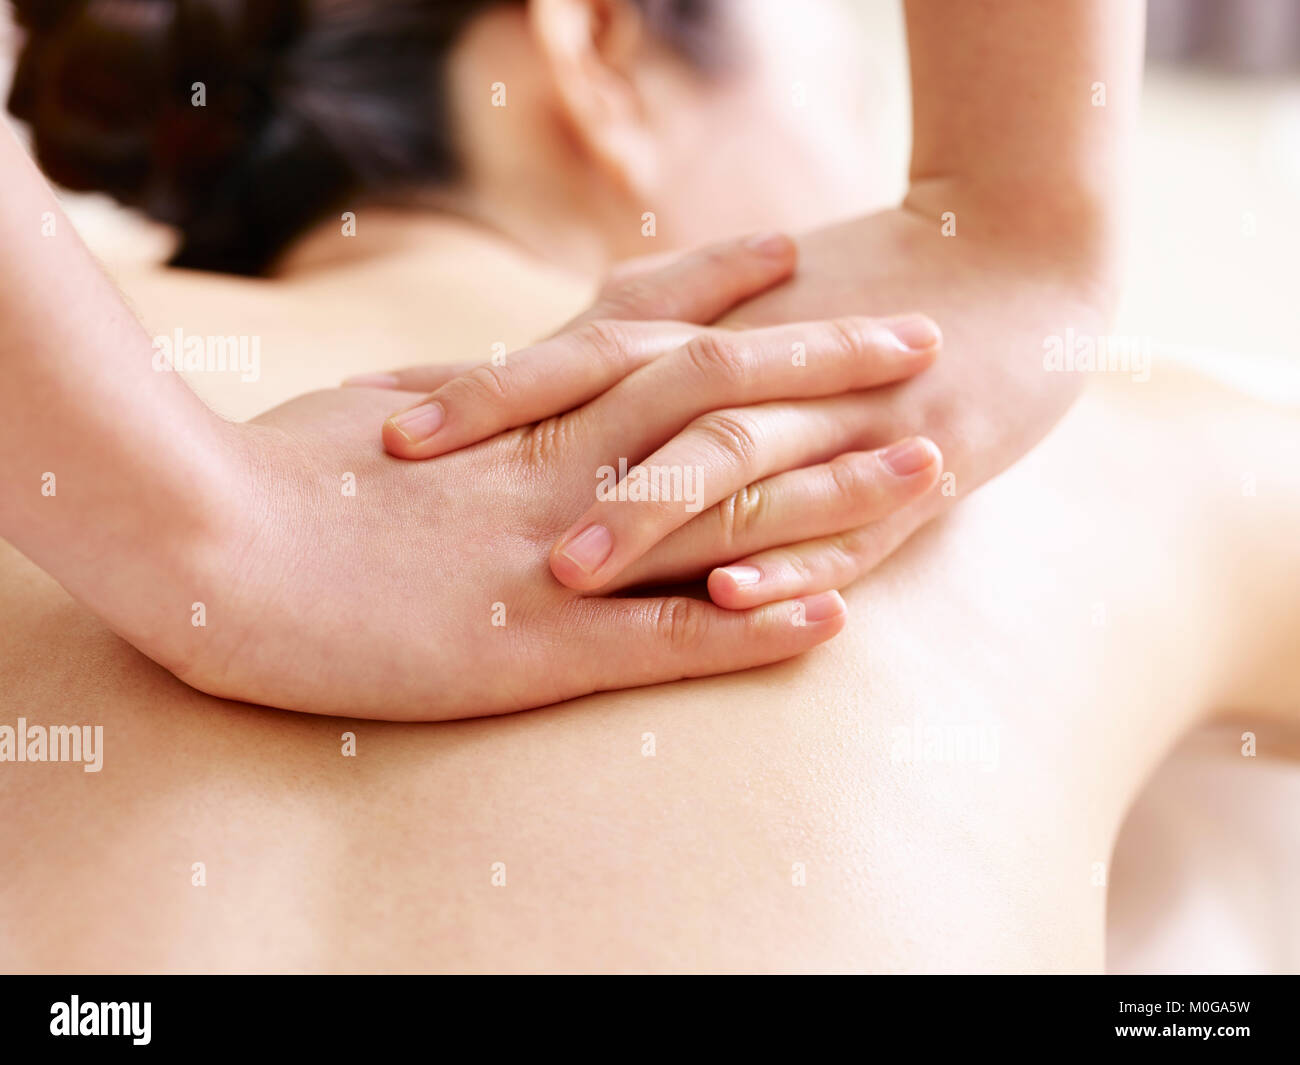 close-up of hands of a masseur massaging back of a young asian woman Stock Photo